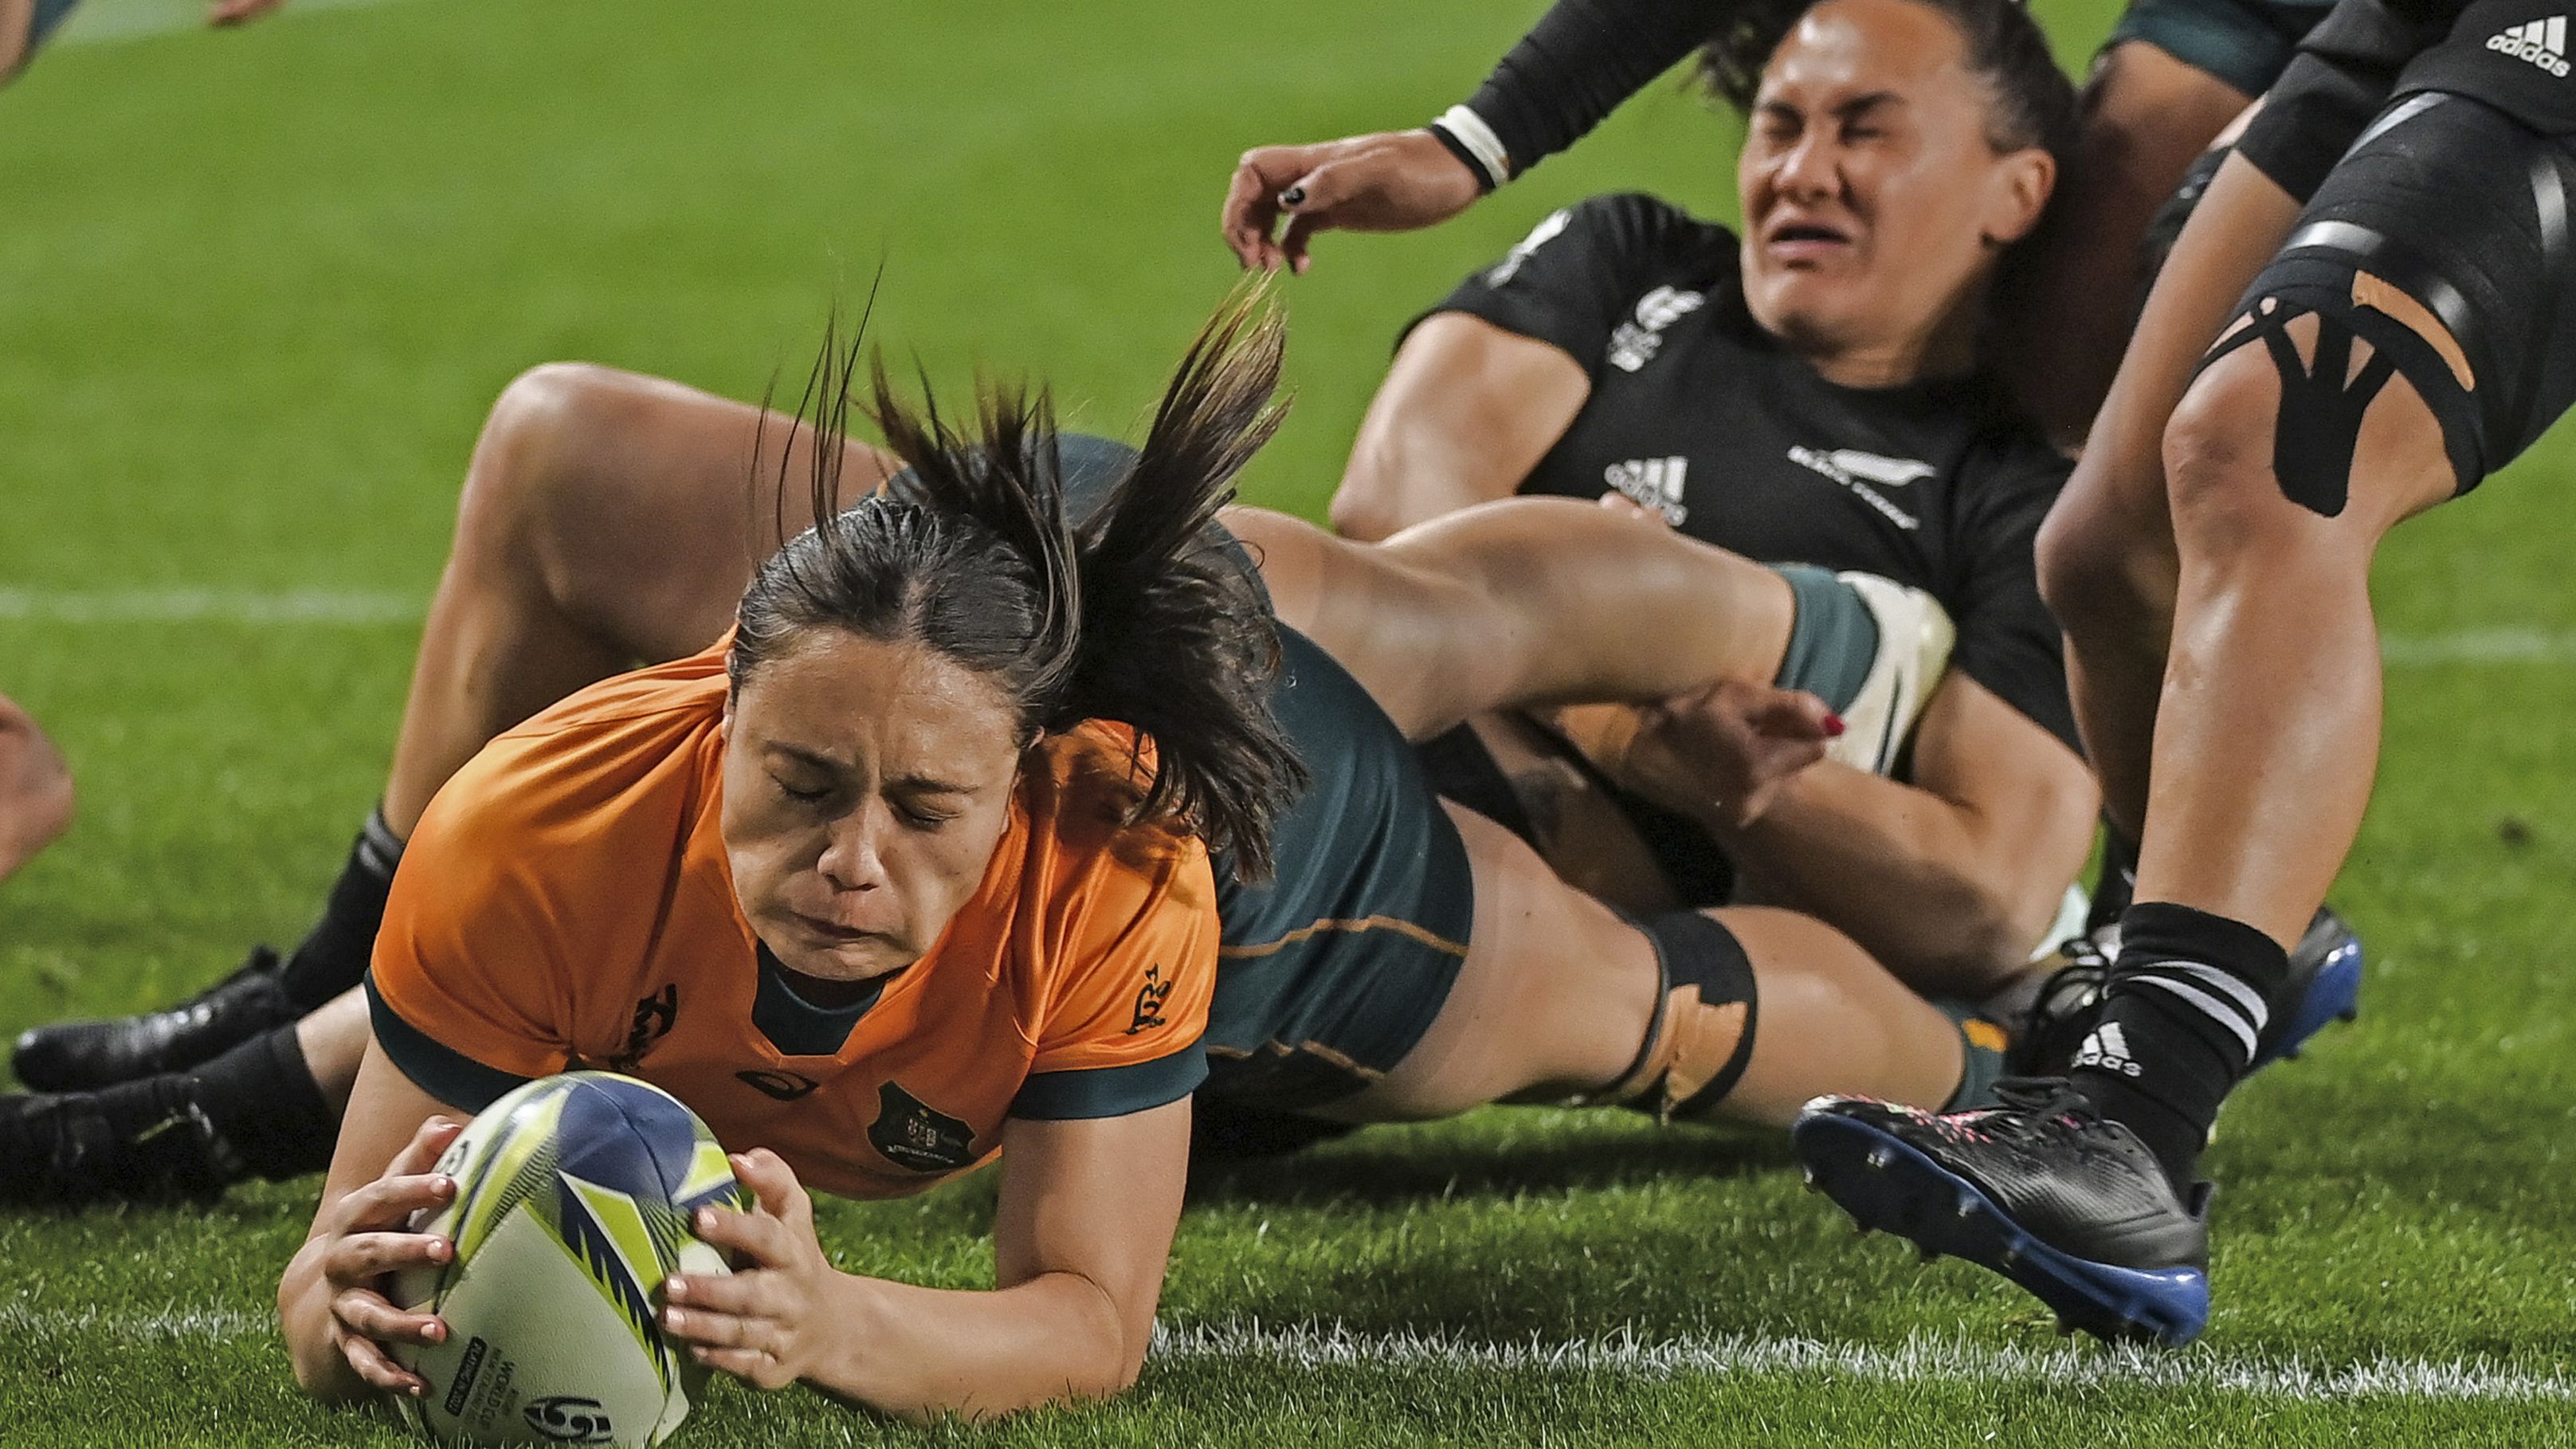 Bienne Terita of Australia scores a try during the Rugby World Cup.